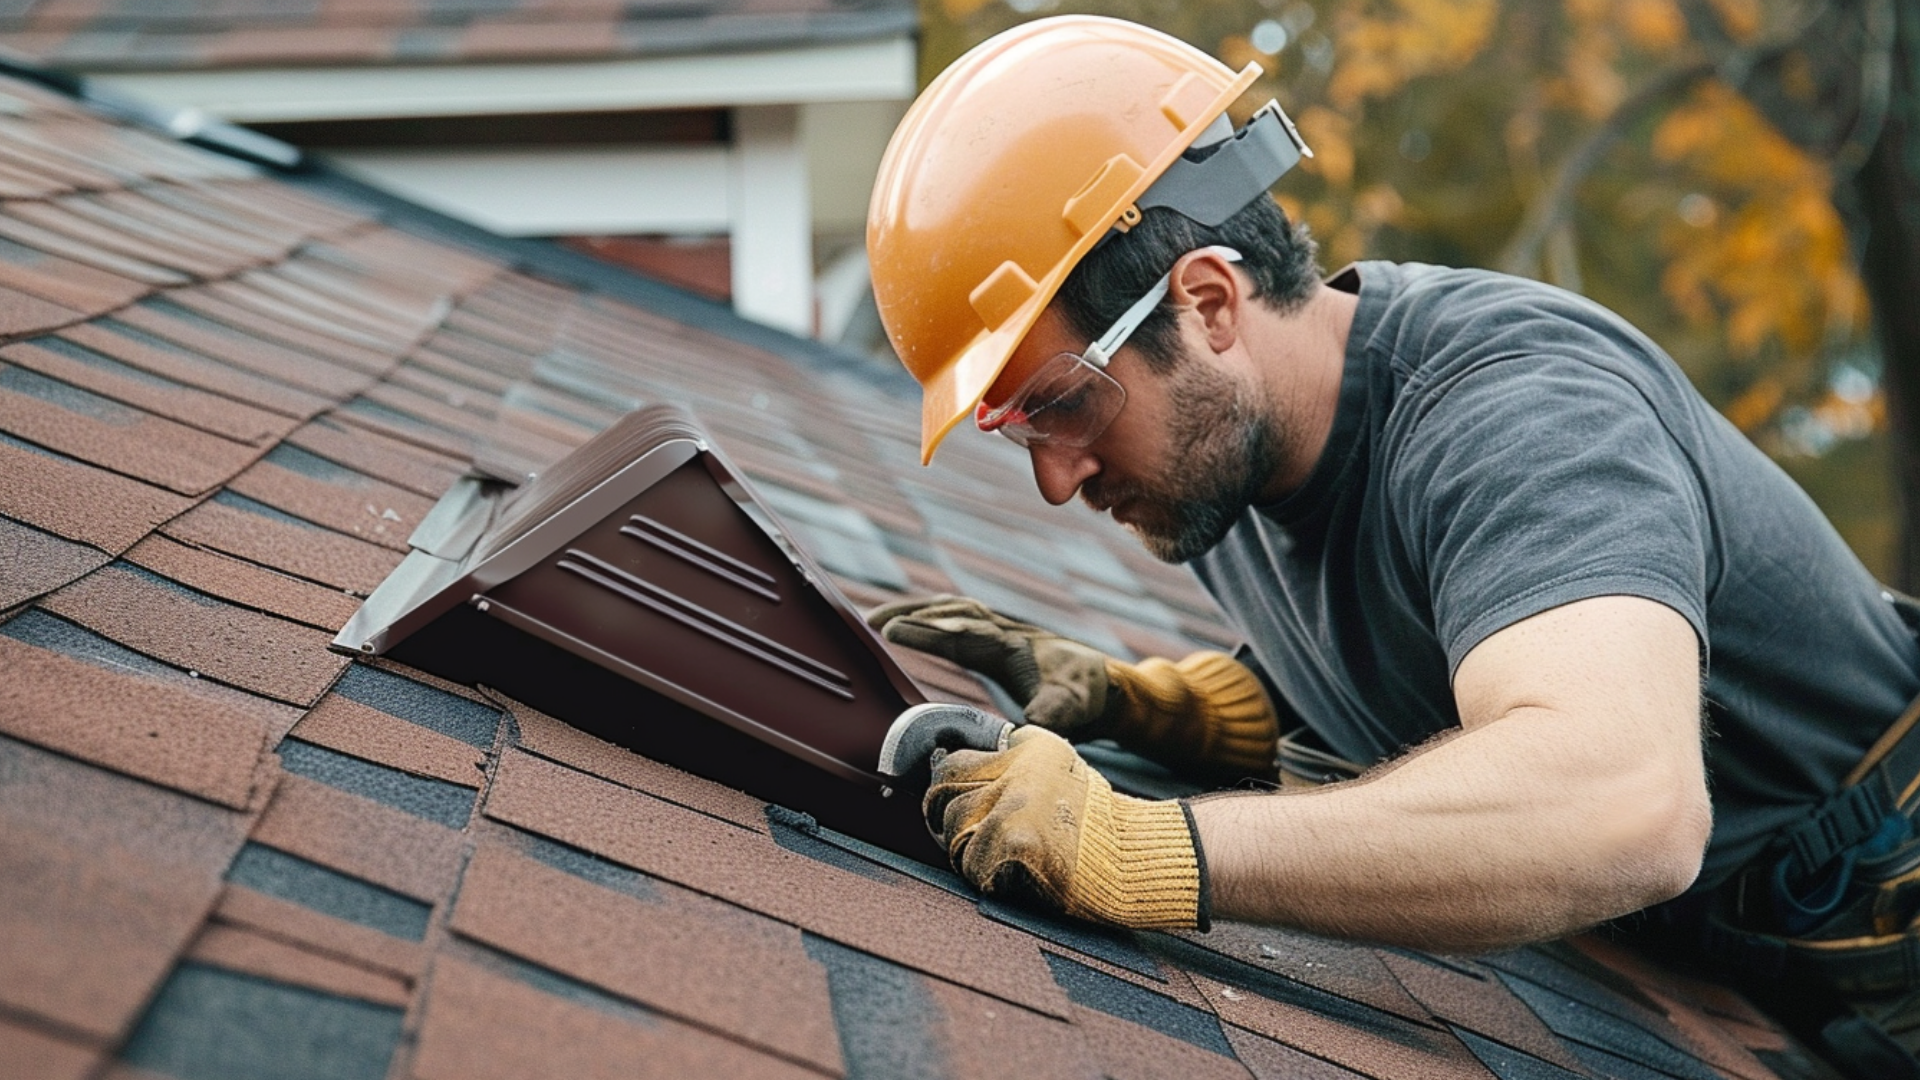 An image of a roofer installing a roof ventilation in asphalt shingles roof on a picturesque suburban home, wearing safety quipment and glasses.